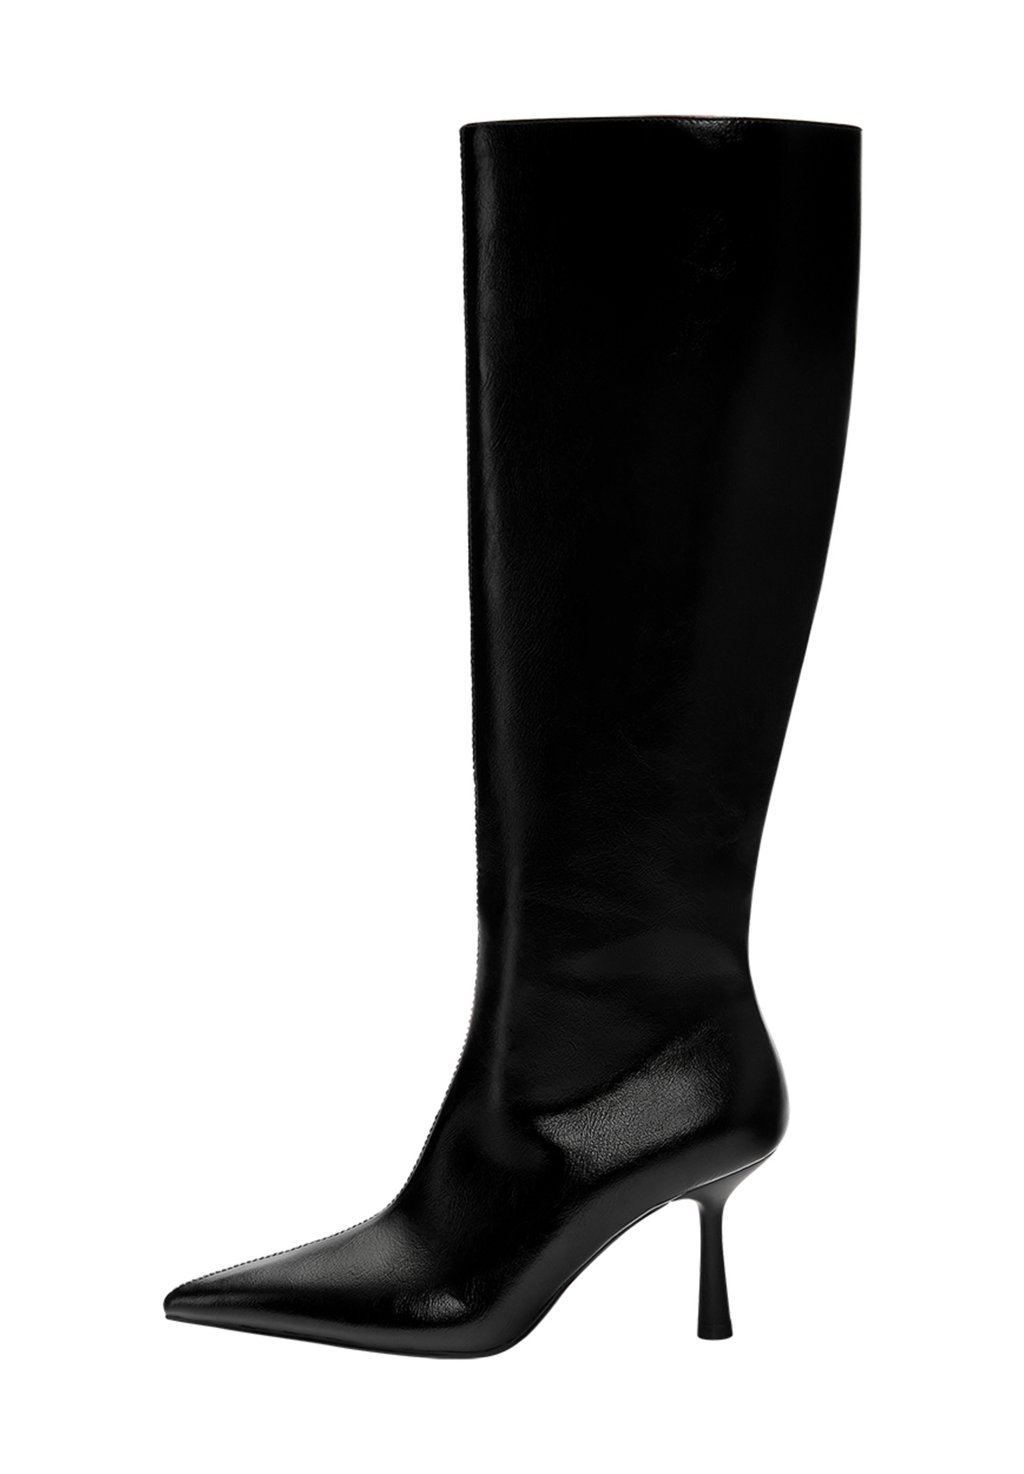 Сапоги HIGH-HEEL WITH POINTED TOES PULL&BEAR, цвет black